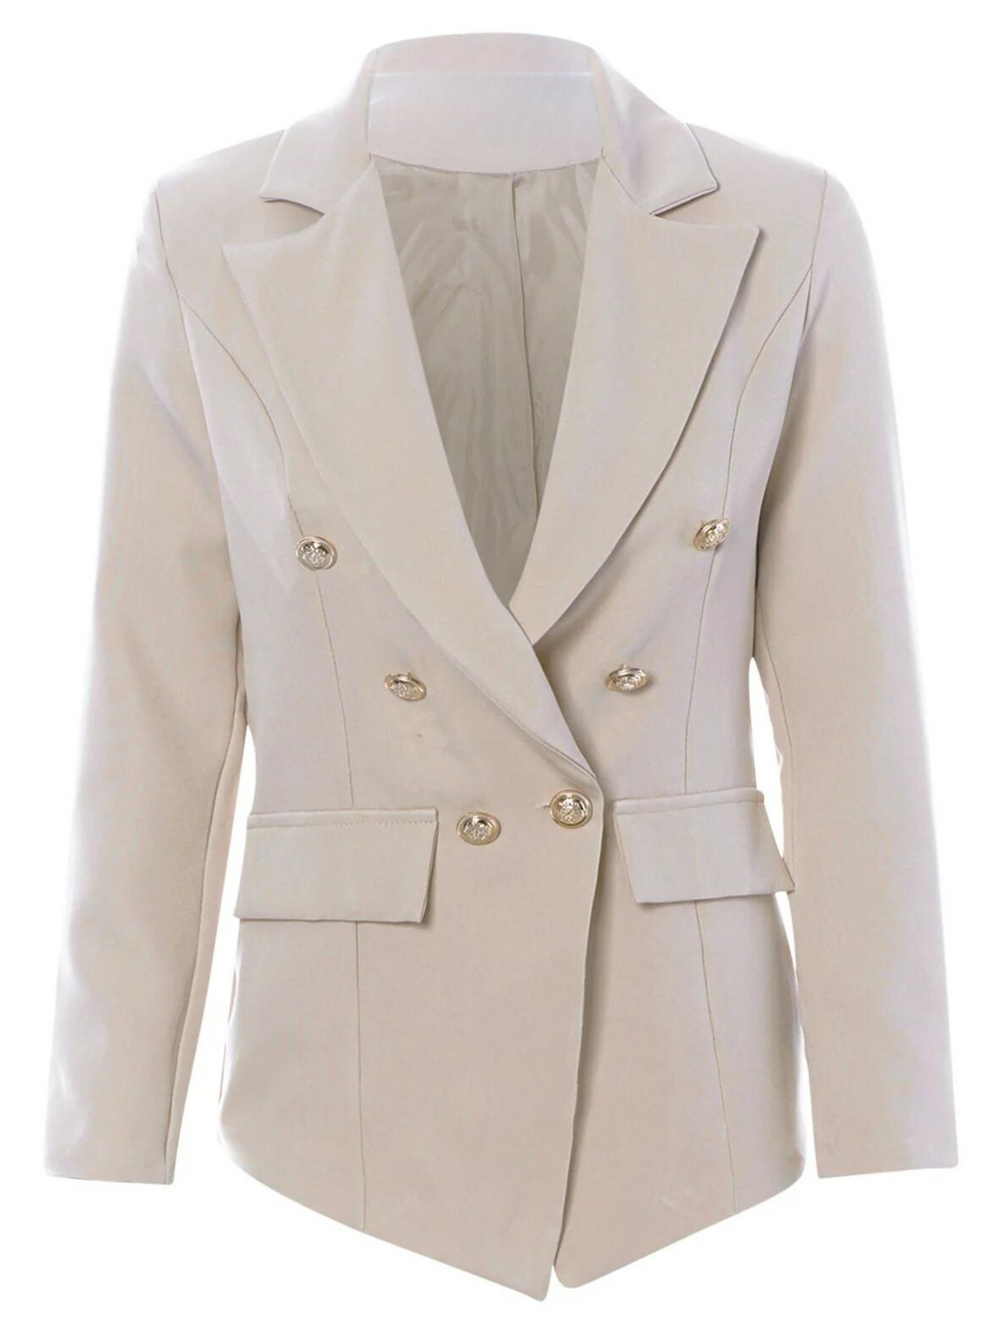 Manequin wears  a stone coloured blazer with gold military button detailing at the front and the sleeves (cuffs.)